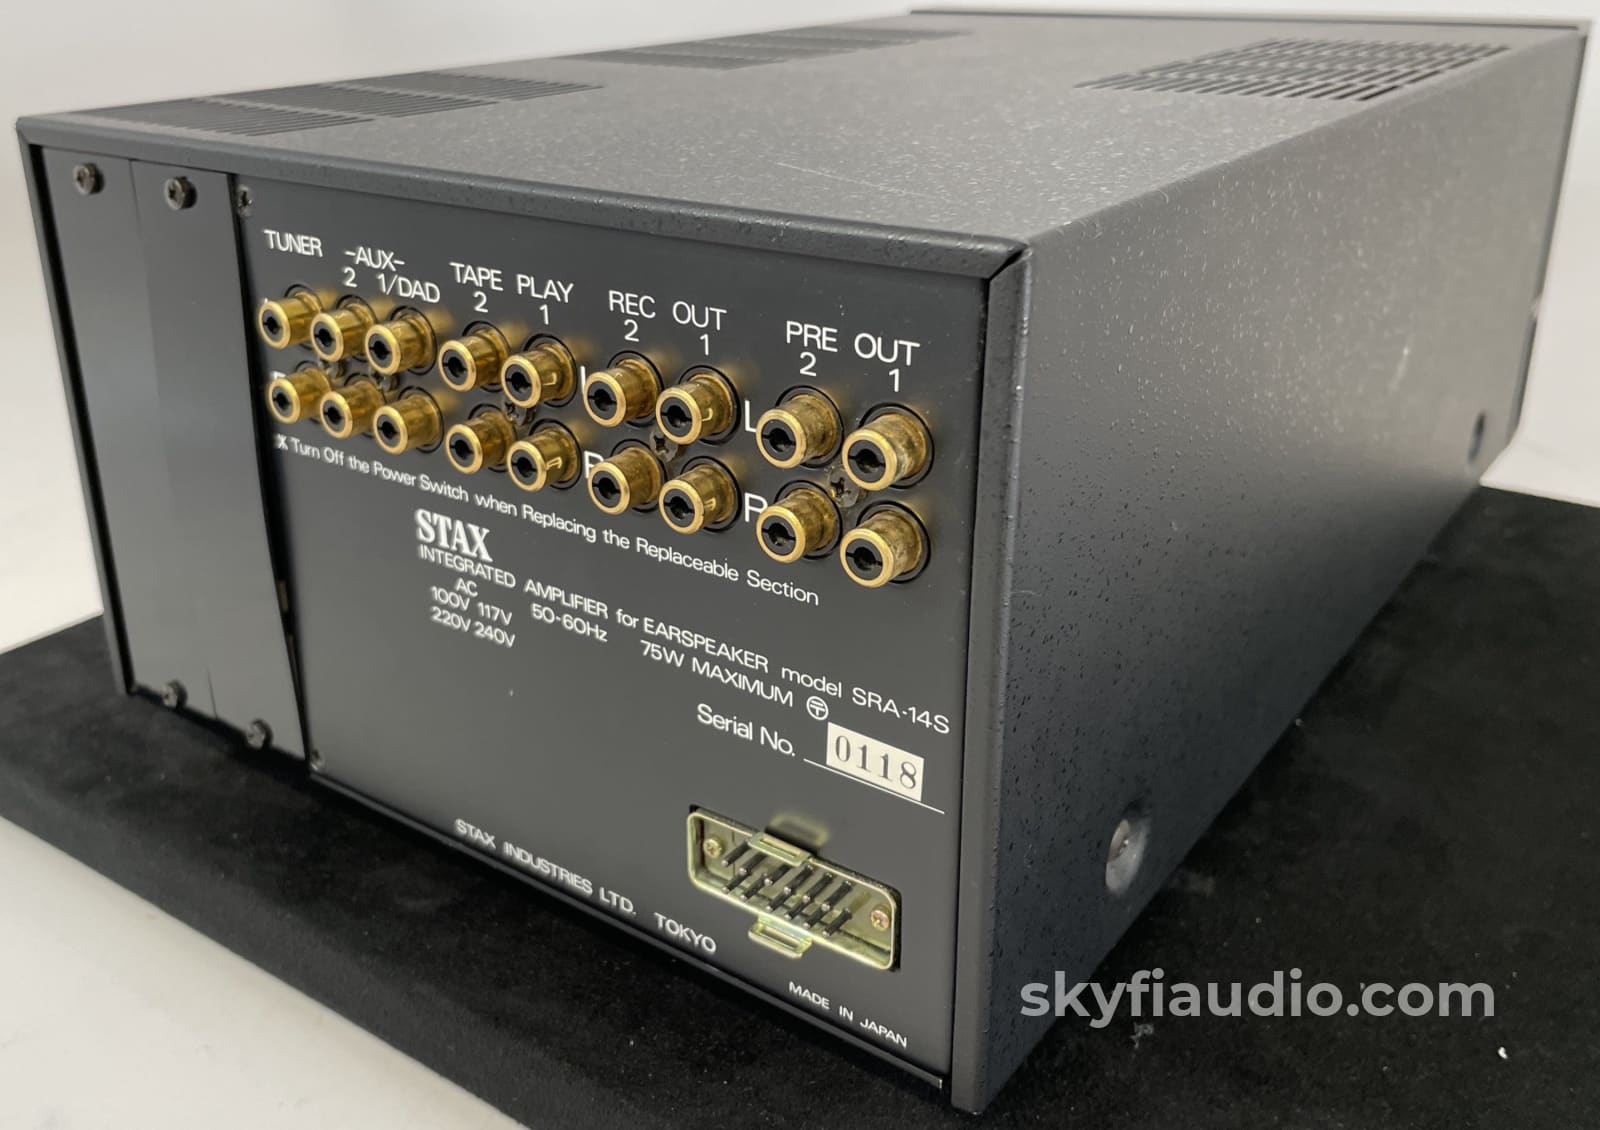 Stax SRA-14S Headphone Amplifier With Stax SR-507 Electrostatic Headph